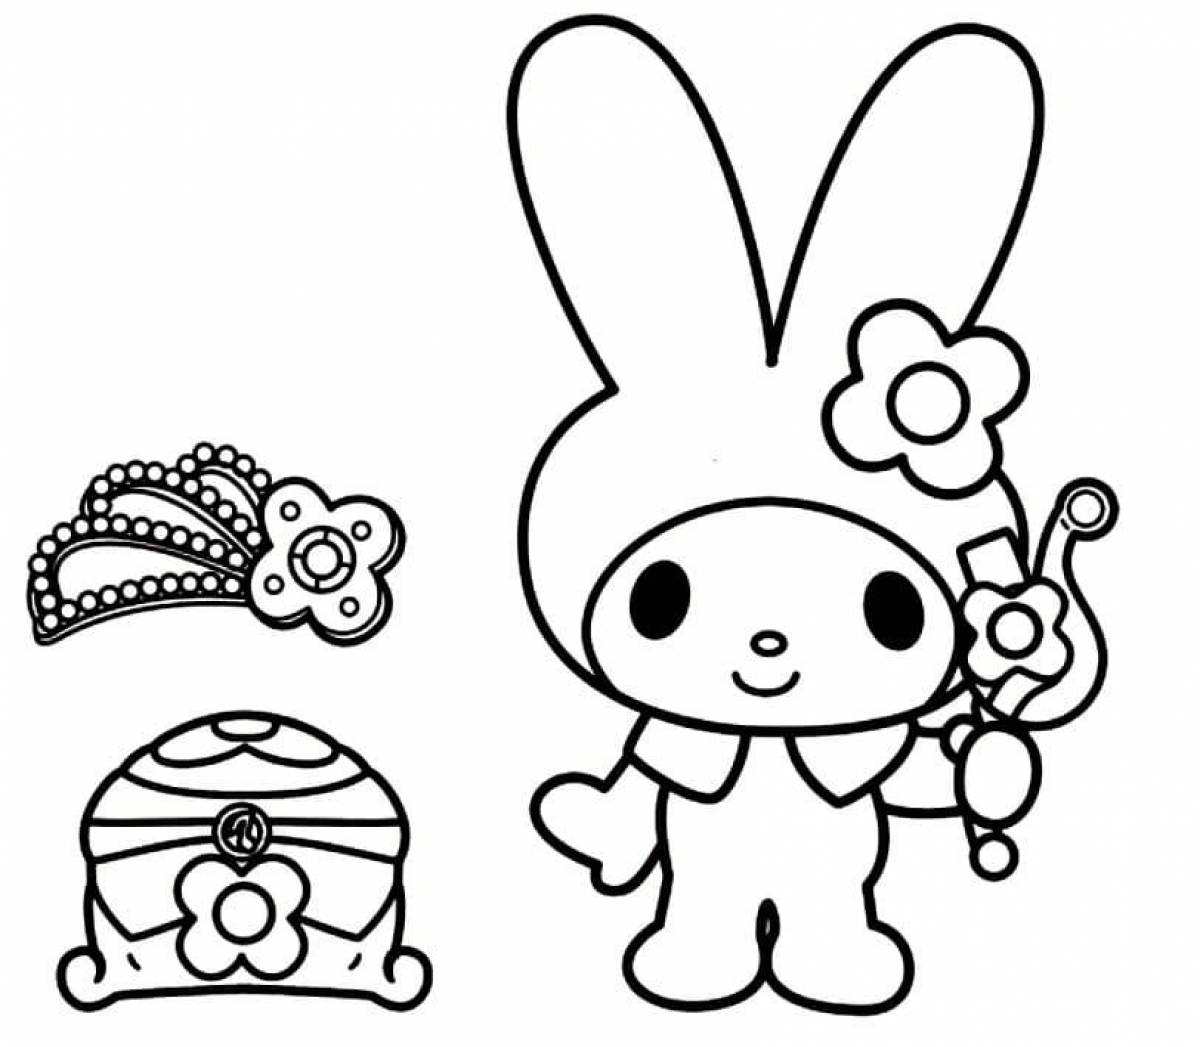 Kuromi and Mai Melody's playful coloring page